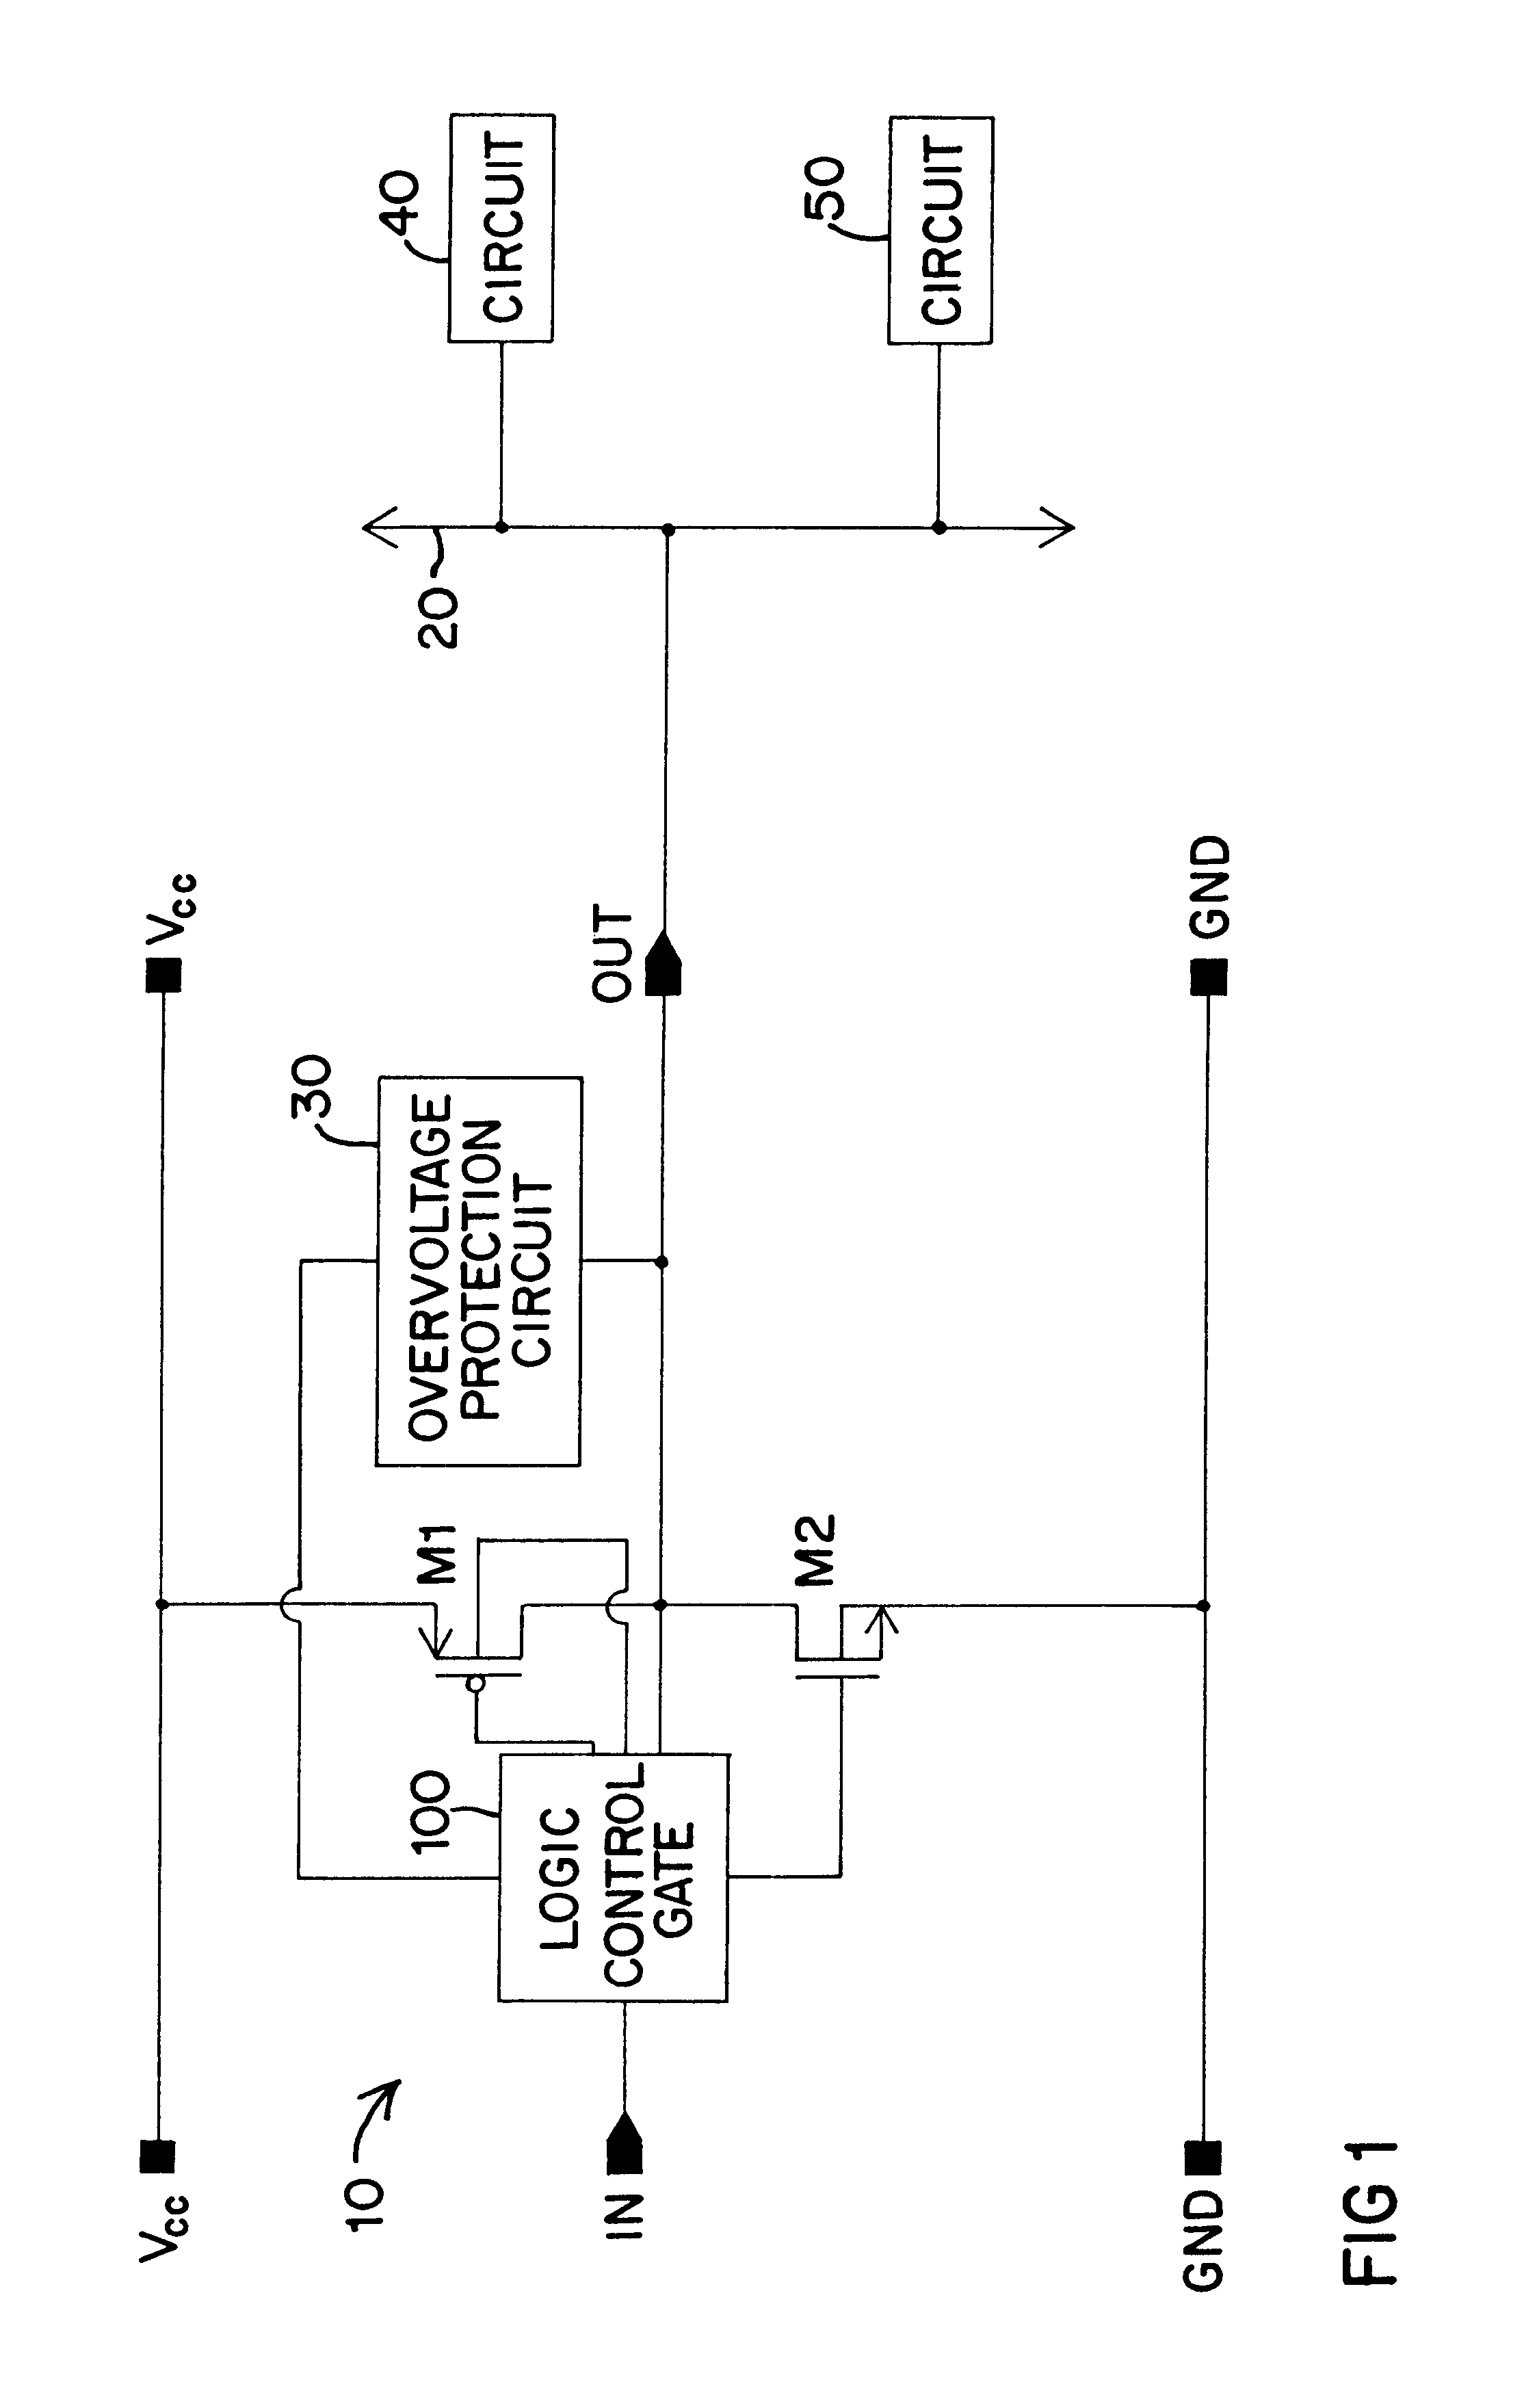 Overvoltage protection circuit with overvoltage removal sensing